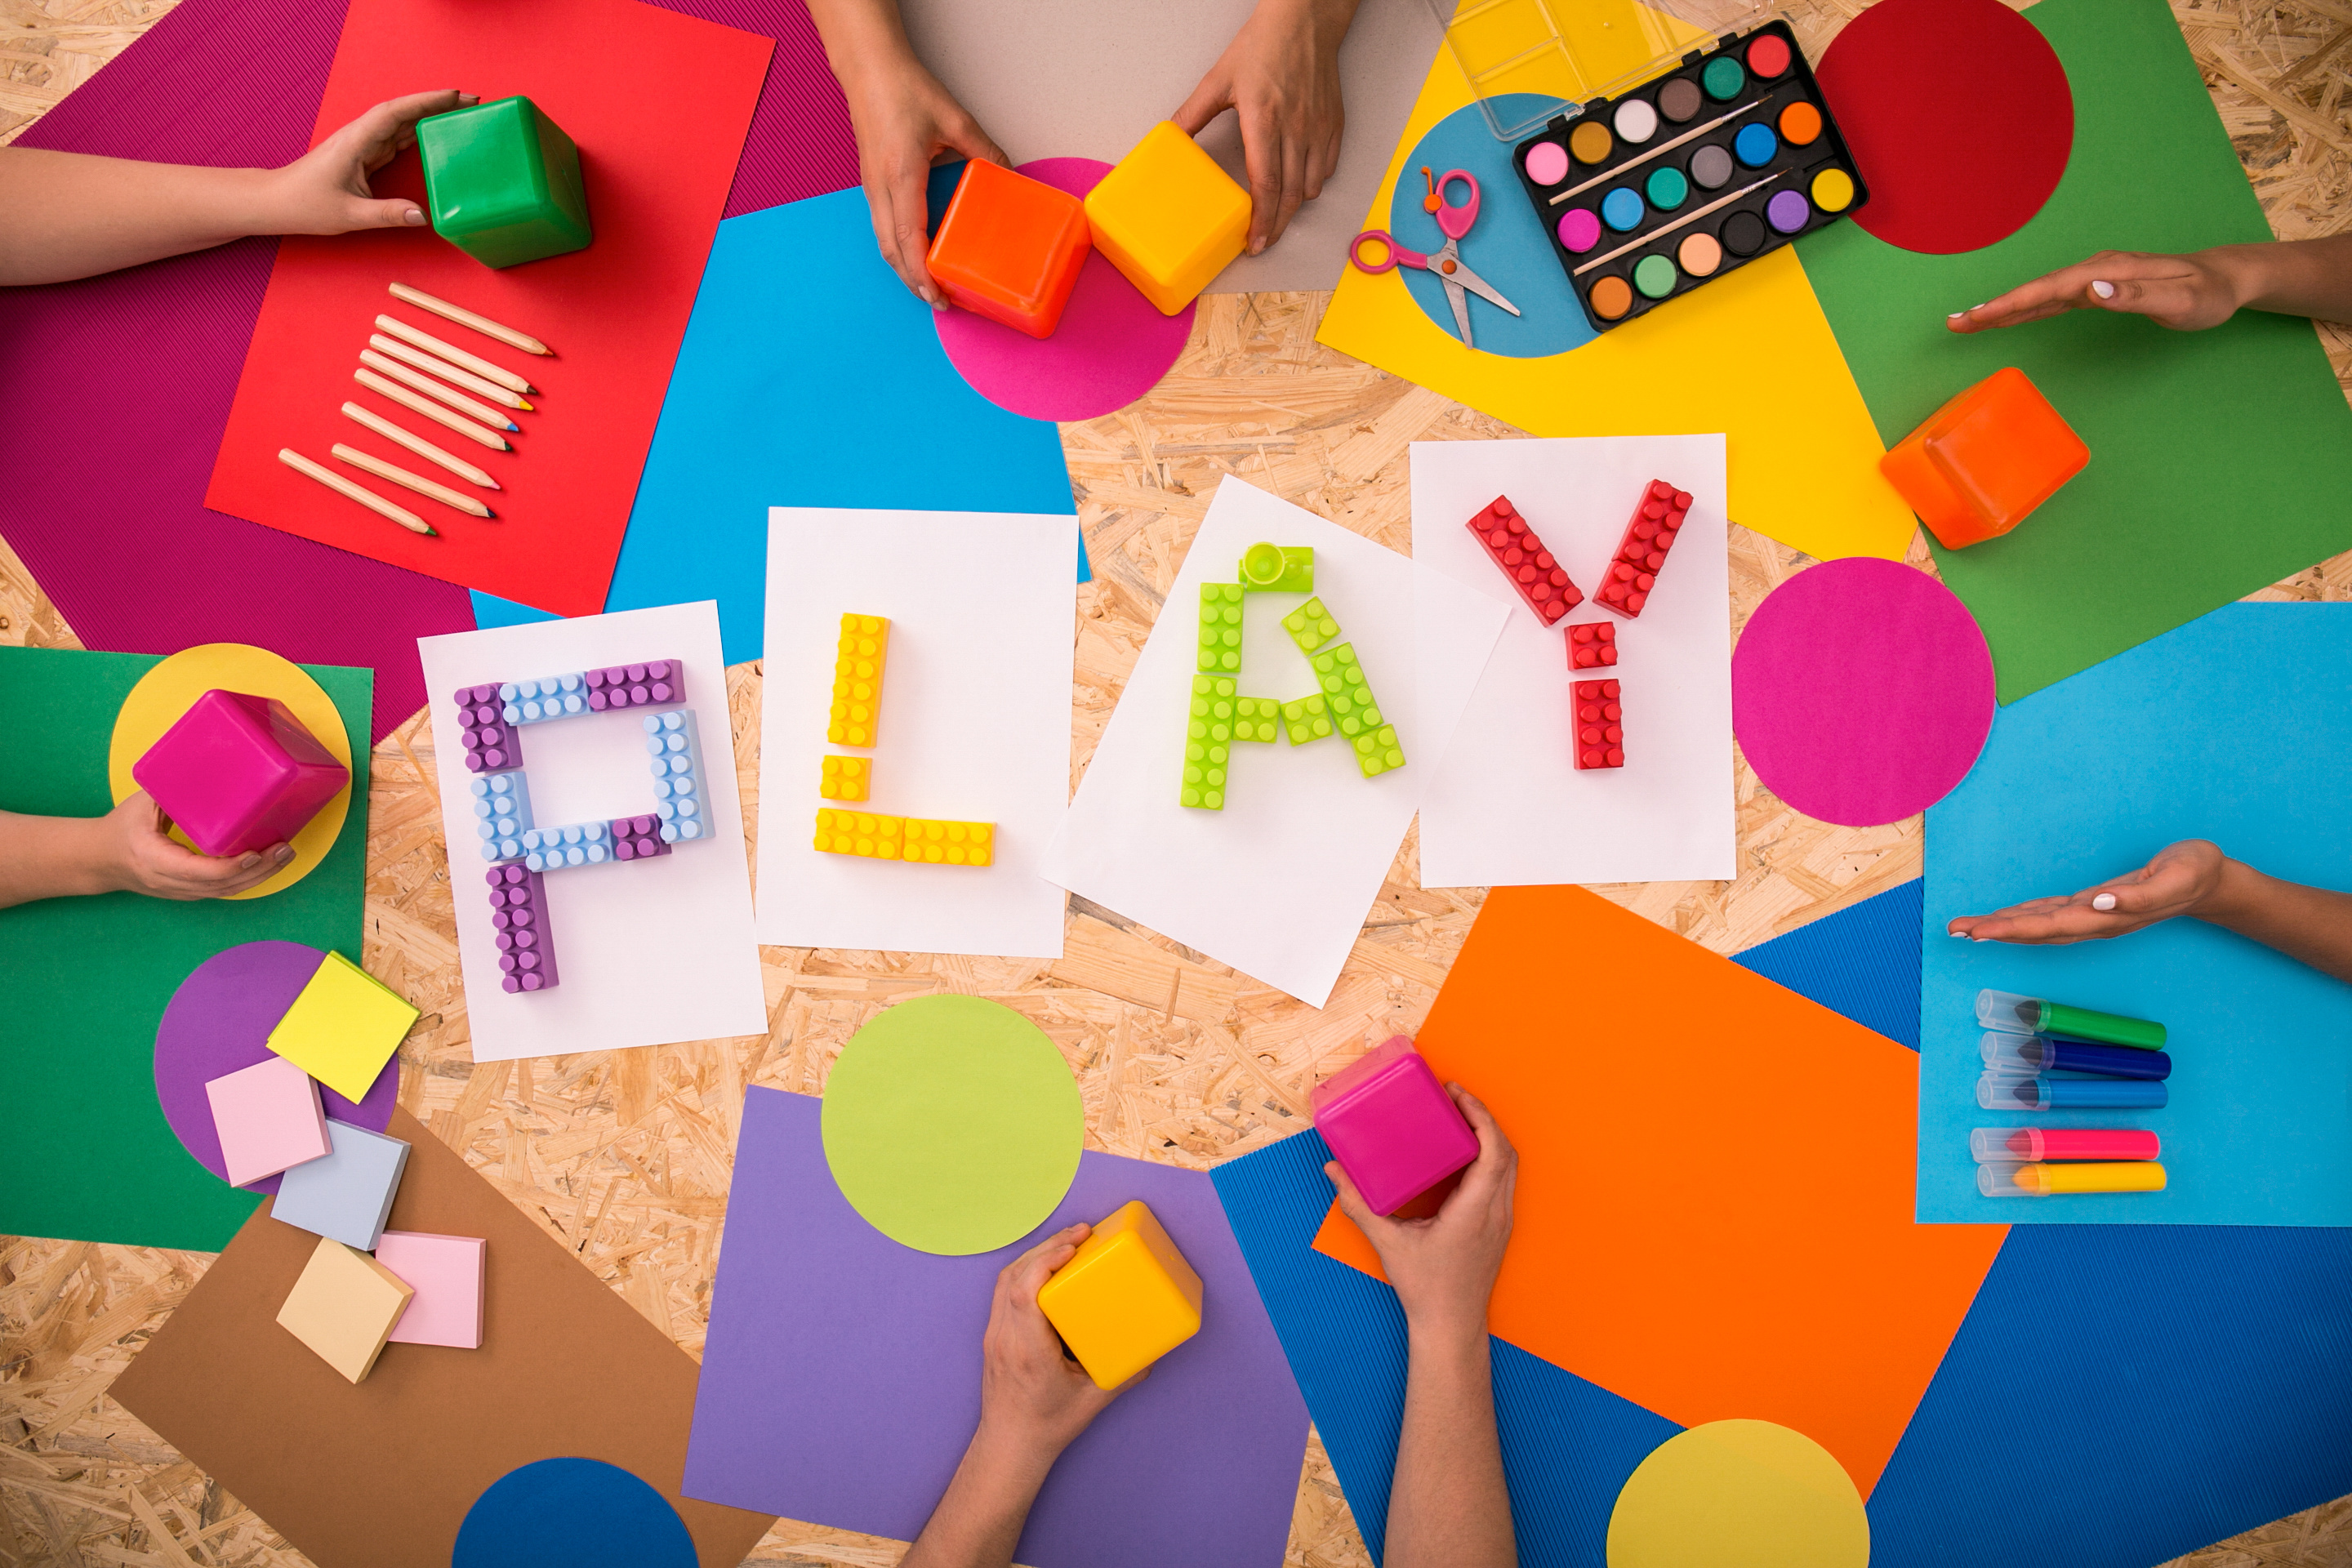 'Play' spelled out in colorful legos